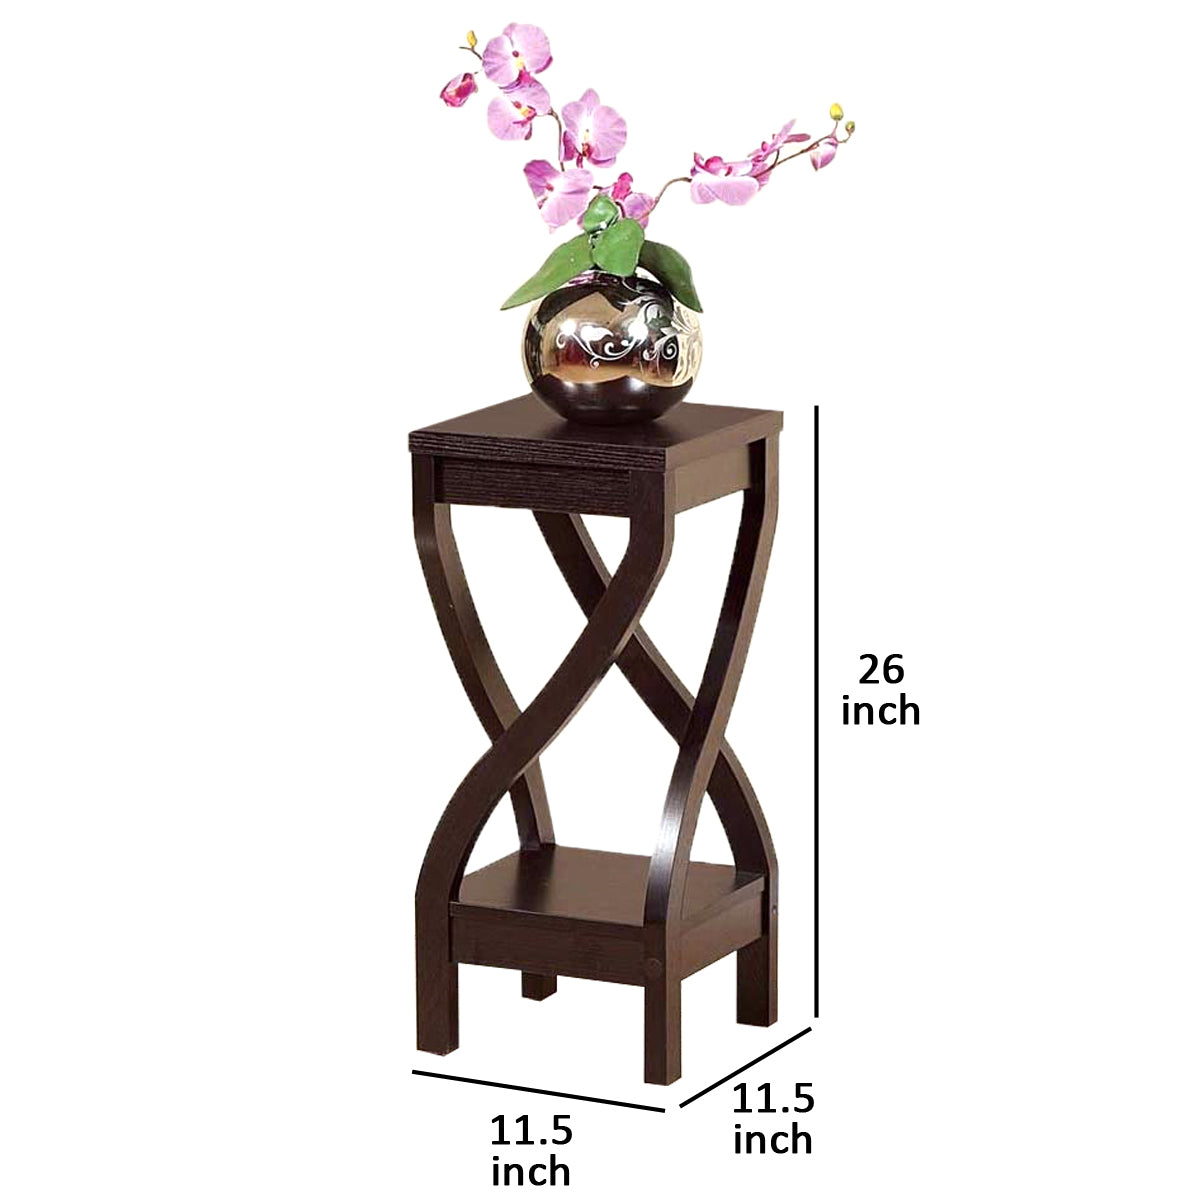 Square Top Wooden Plant Stand with Curved Legs and Shelves, Small, Dark Brown - BM148786